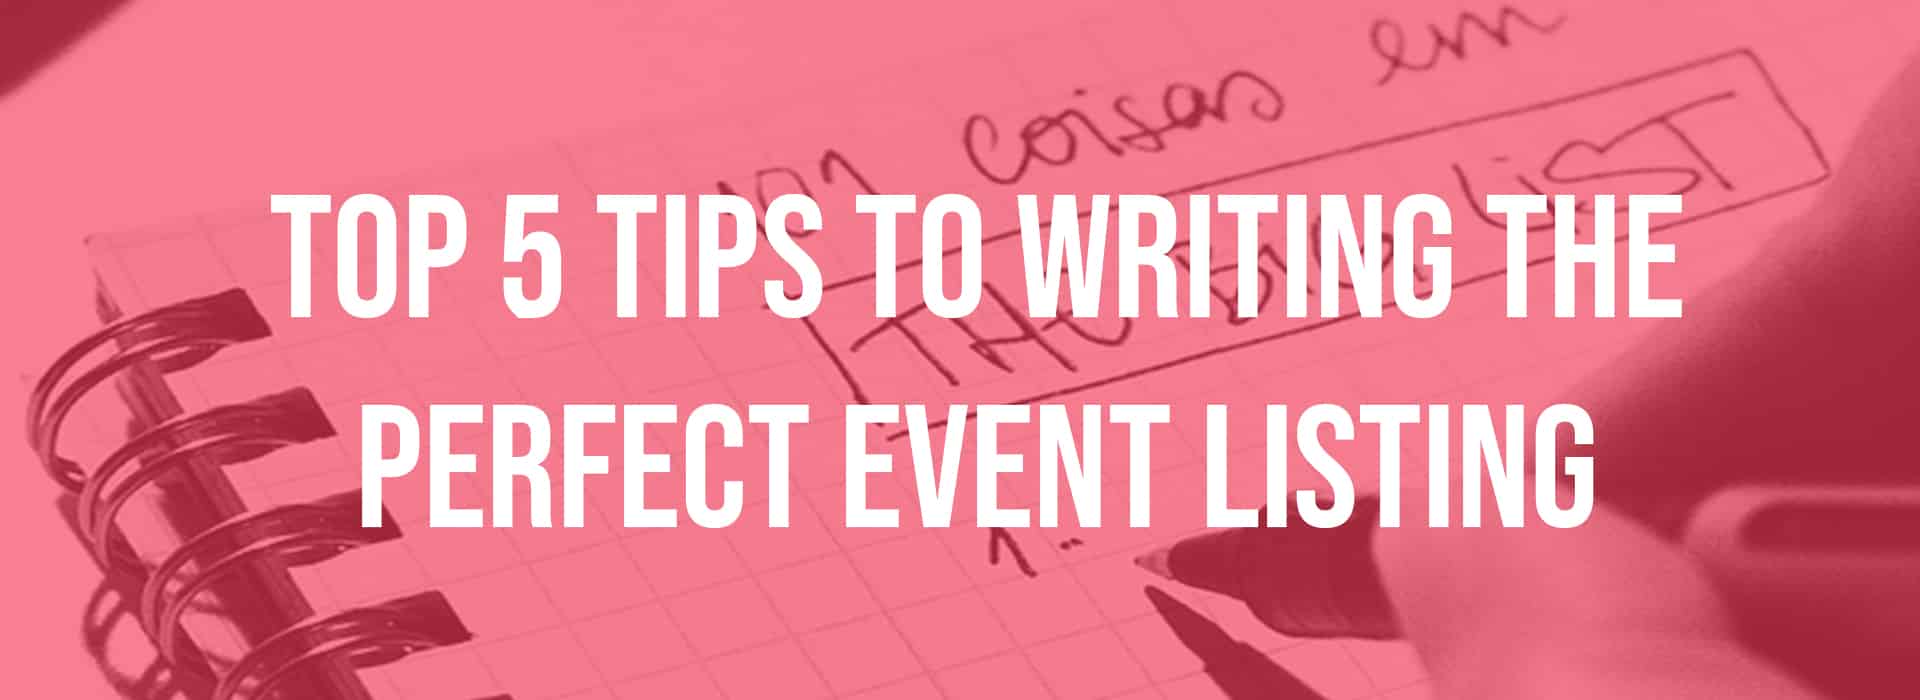 Top 5 Tips to Writing the Perfect Event Listing